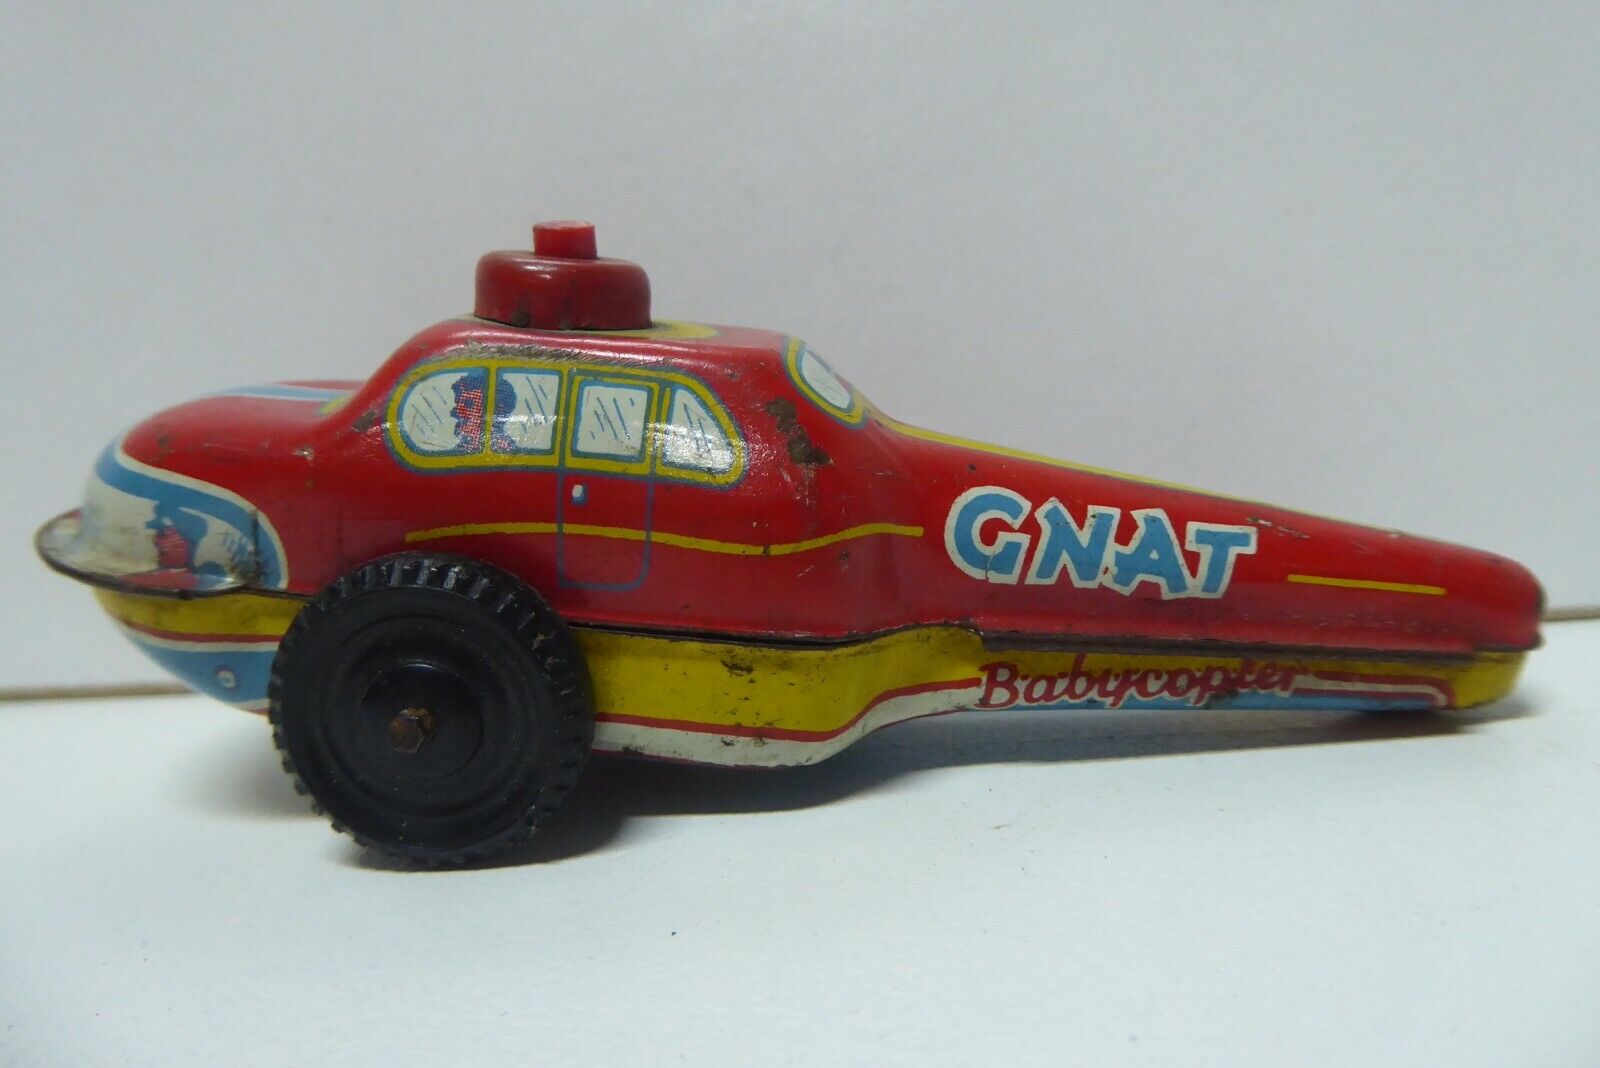 VINTAGE TIN PLATE GNAT HELICOPTER TOY MADE IN ENGLAND